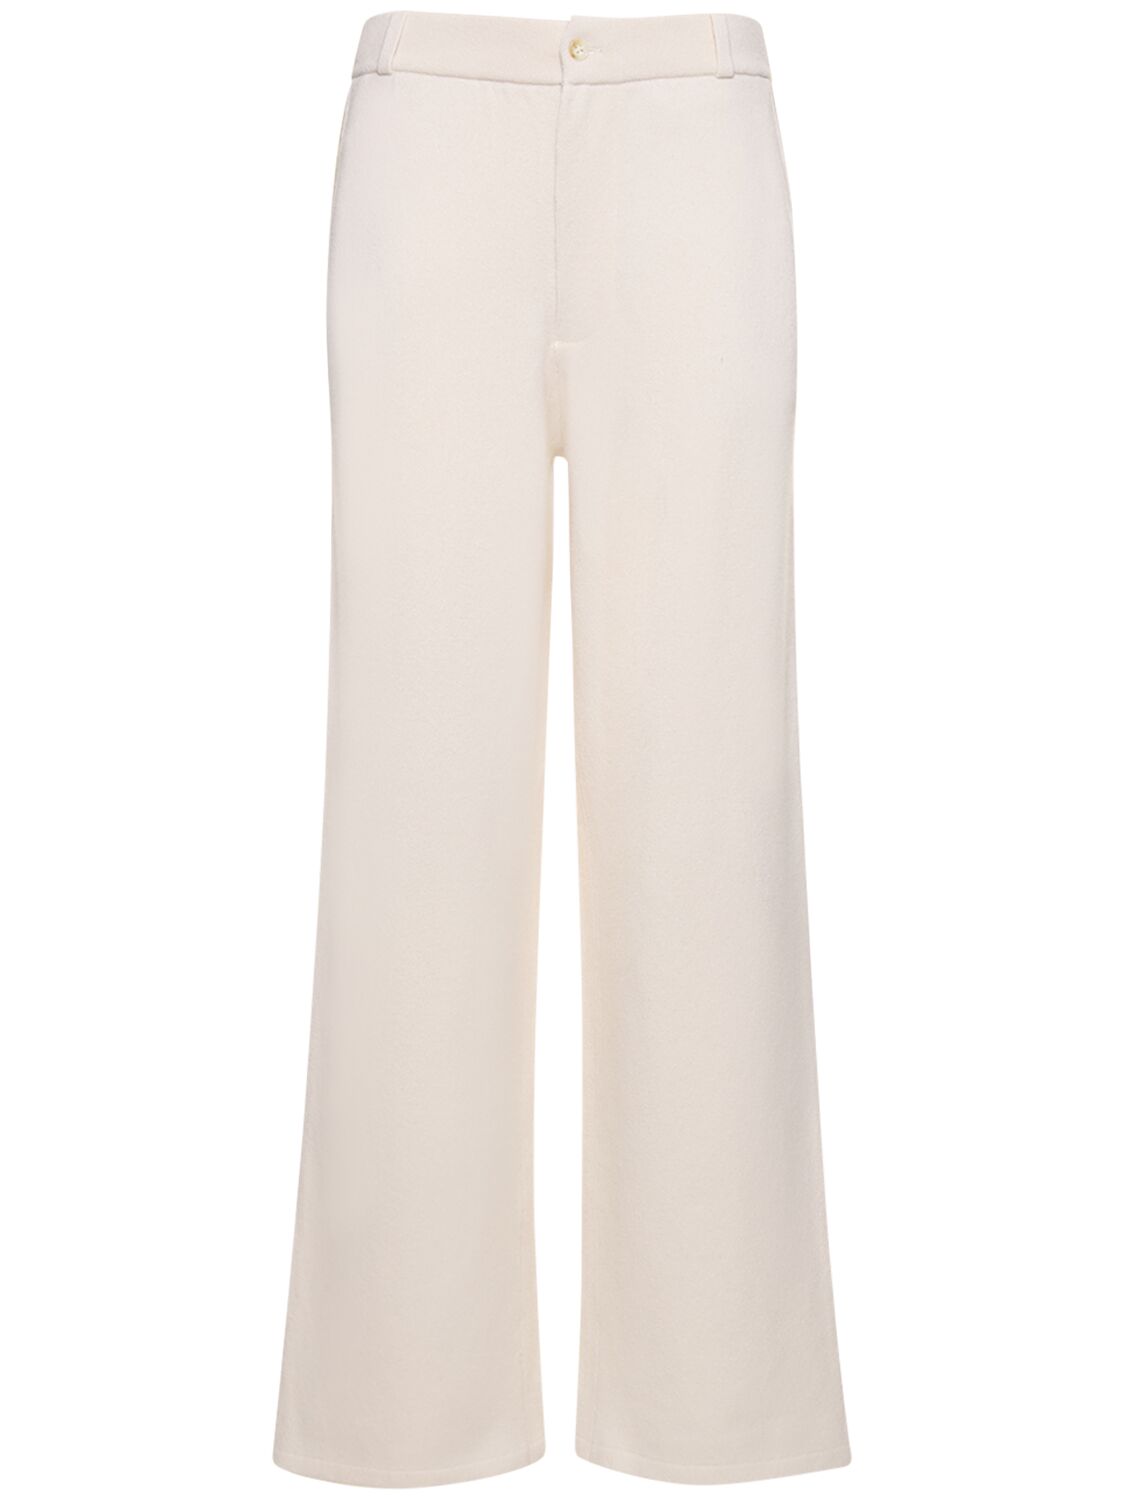 Guest In Residence Tailored Cashmere Trousers In White